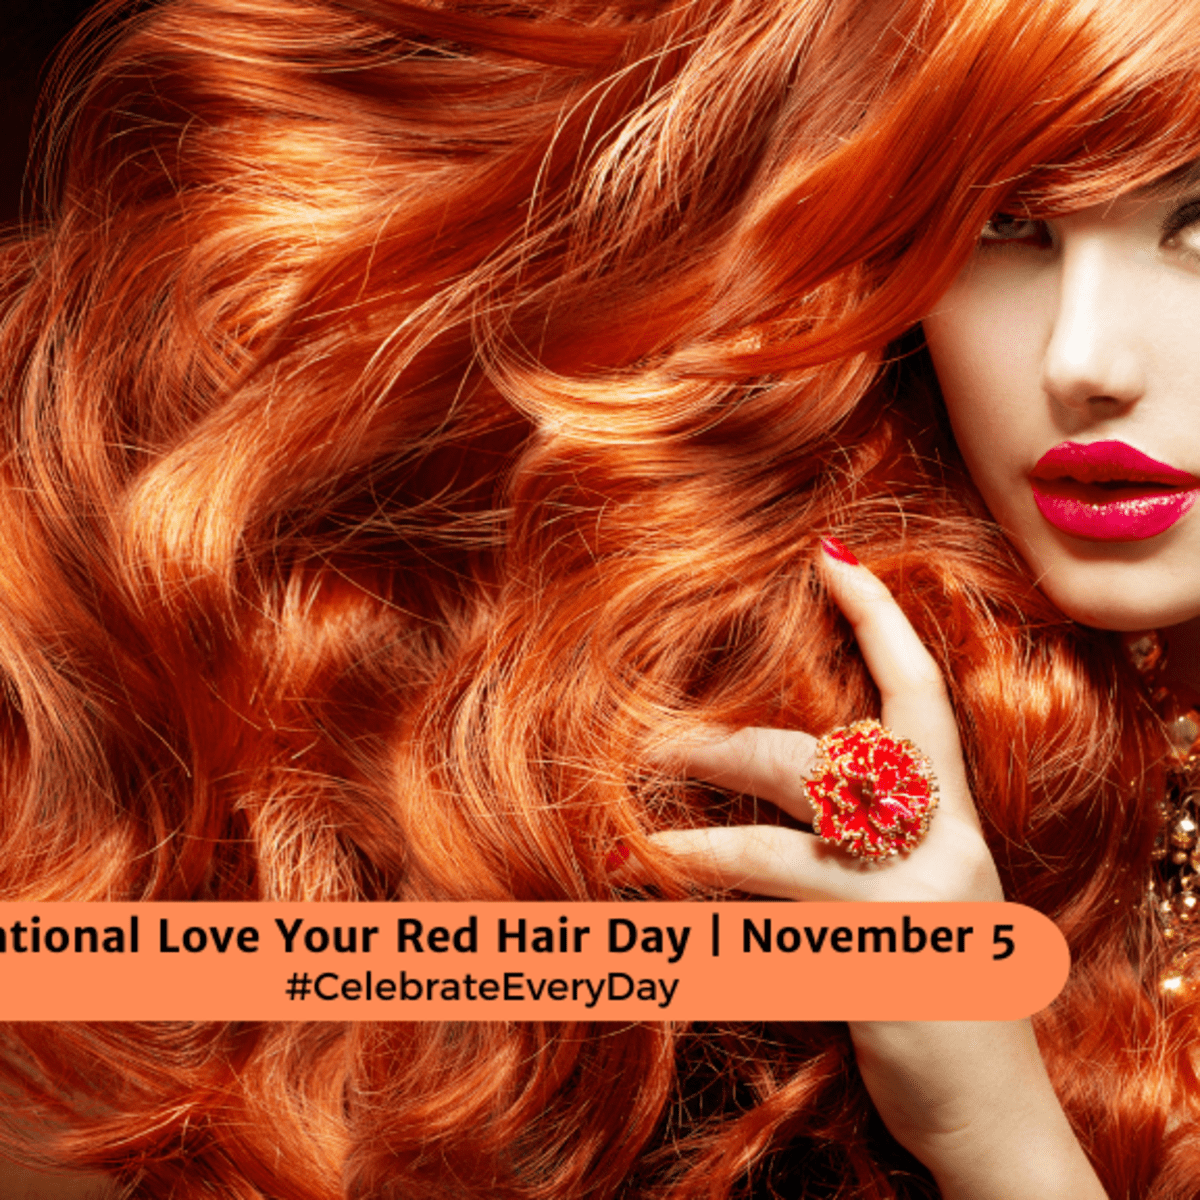 NATIONAL LOVE YOUR RED HAIR DAY  November 5 - National Day Calendar